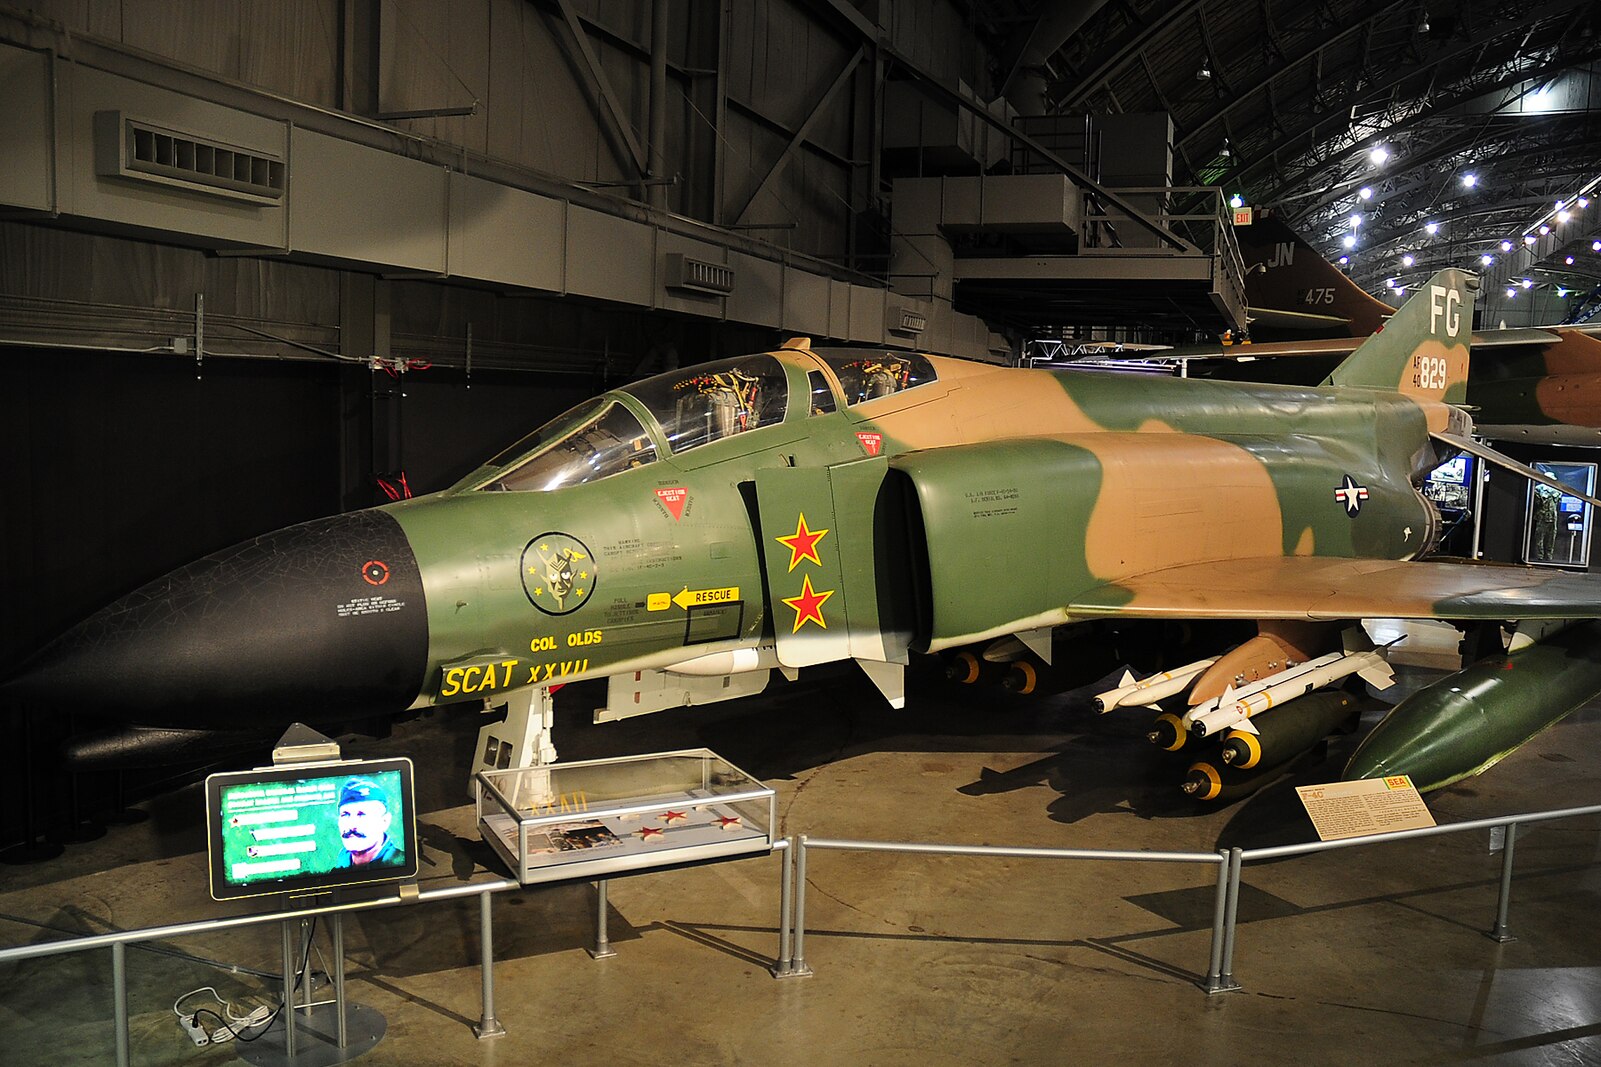 DAYTON, Ohio -- McDonnell Douglas F-4C Phantom II in the Southeast Asia War Gallery at the National Museum of the United States Air Force. (U.S. Air Force photo)